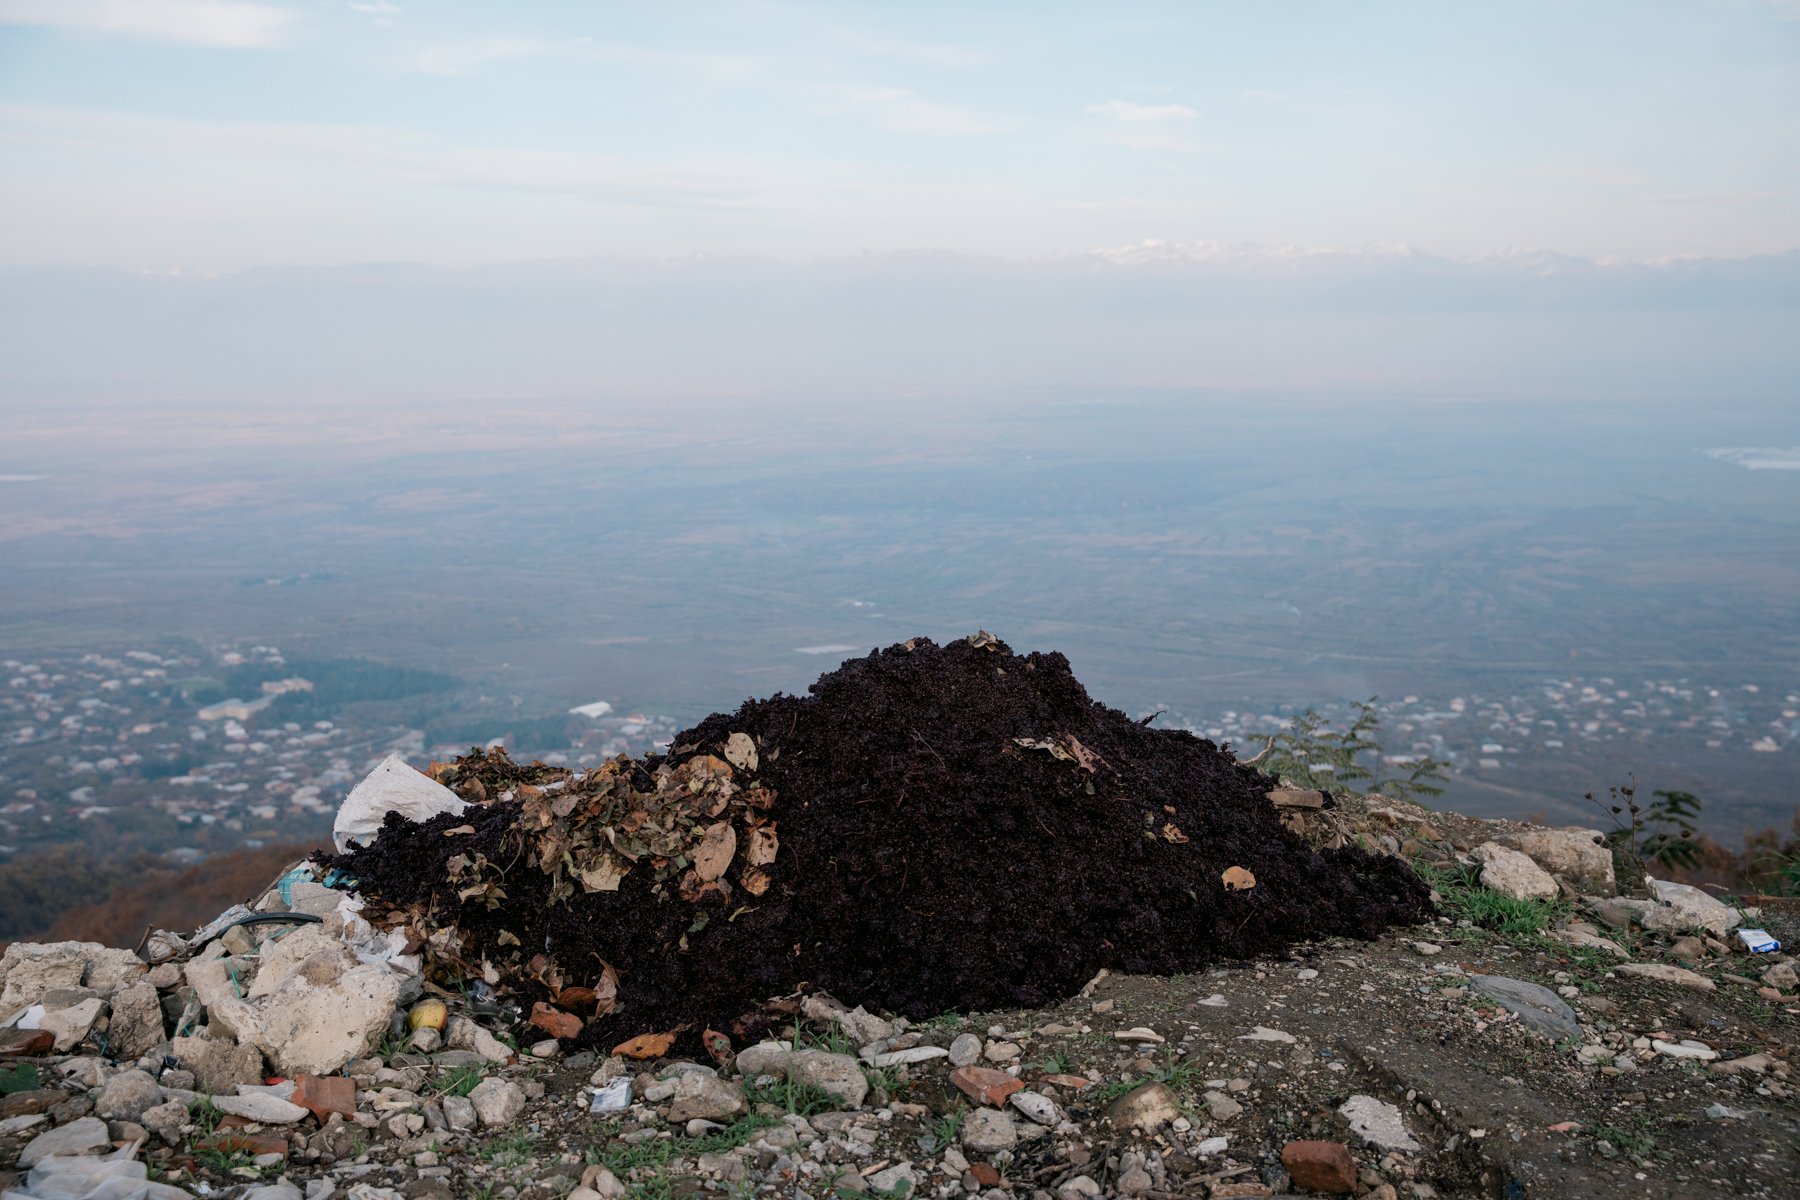  Waste dumped at a view point overlooking the valley near Sighnaghi's town wall. 